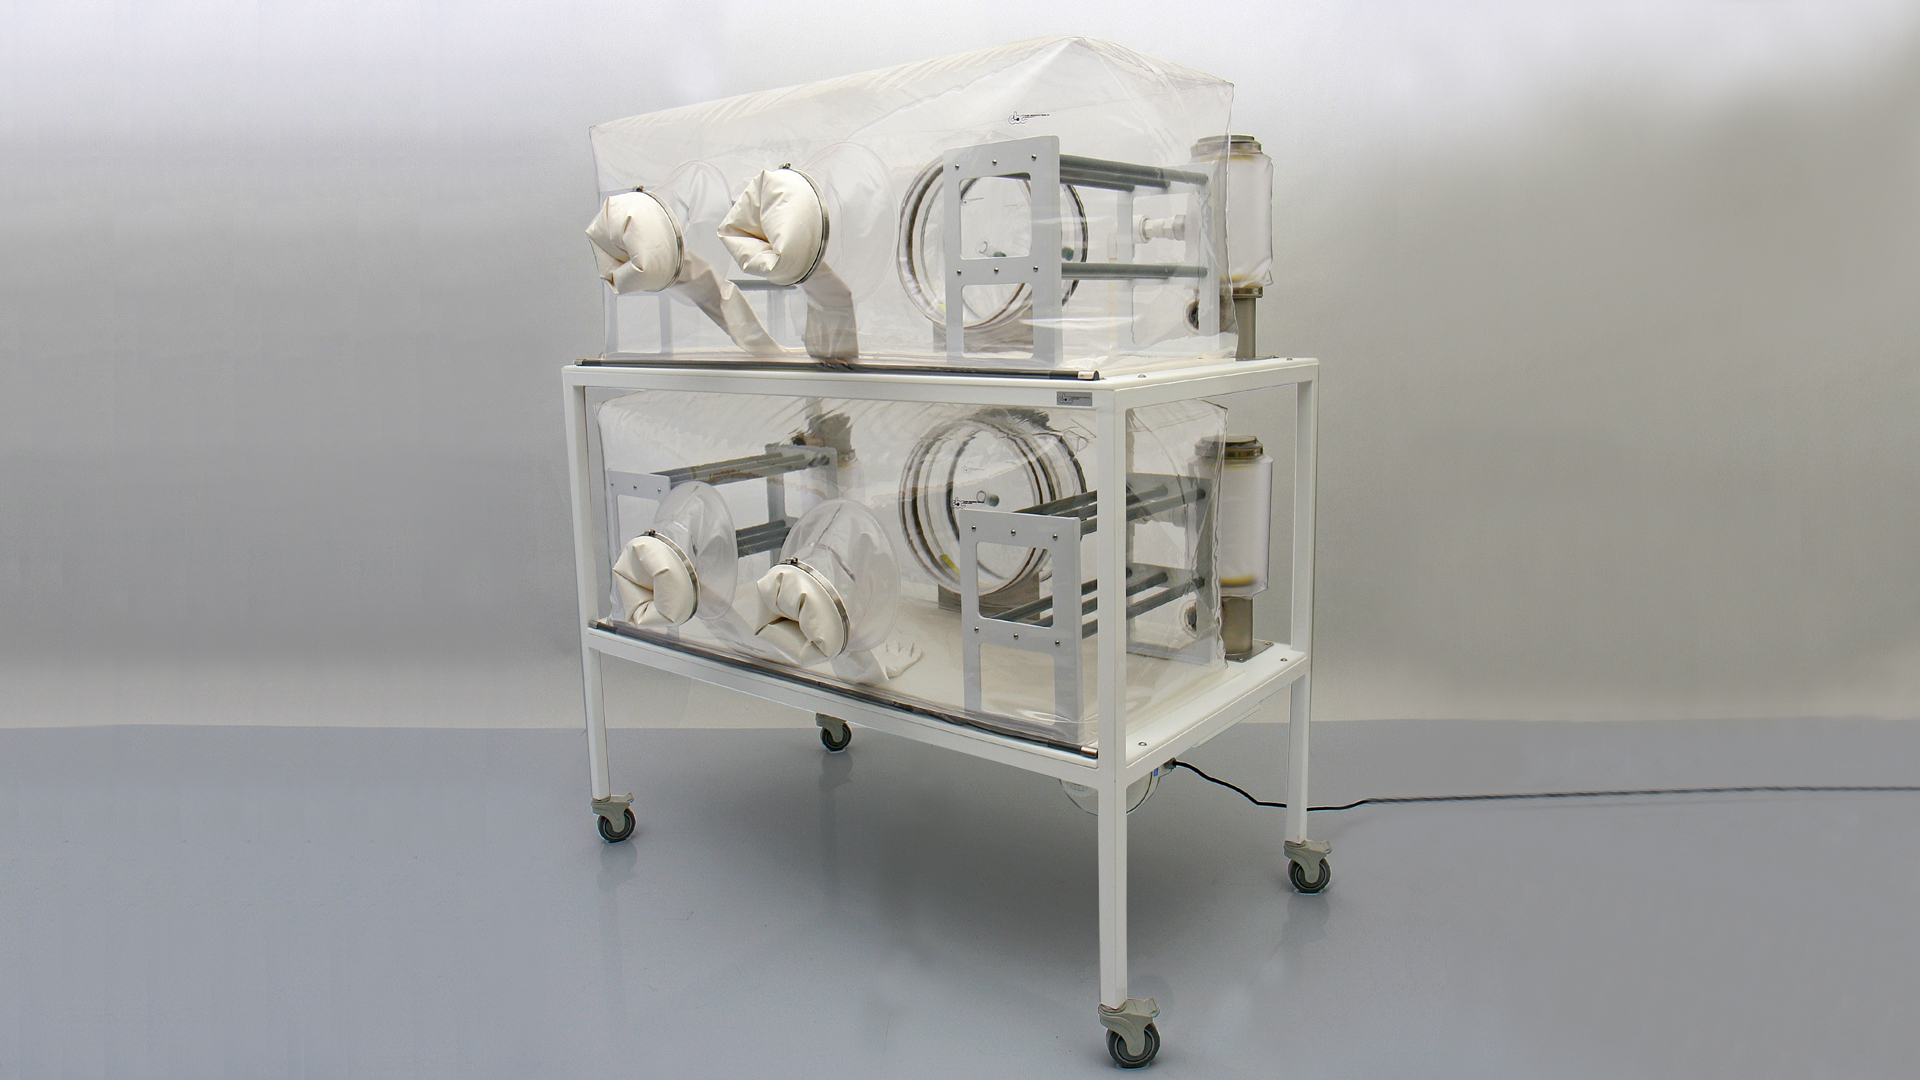 CBC's double-tier flexible film isolators for germ-free, gnotobiotic mice or other rodents.